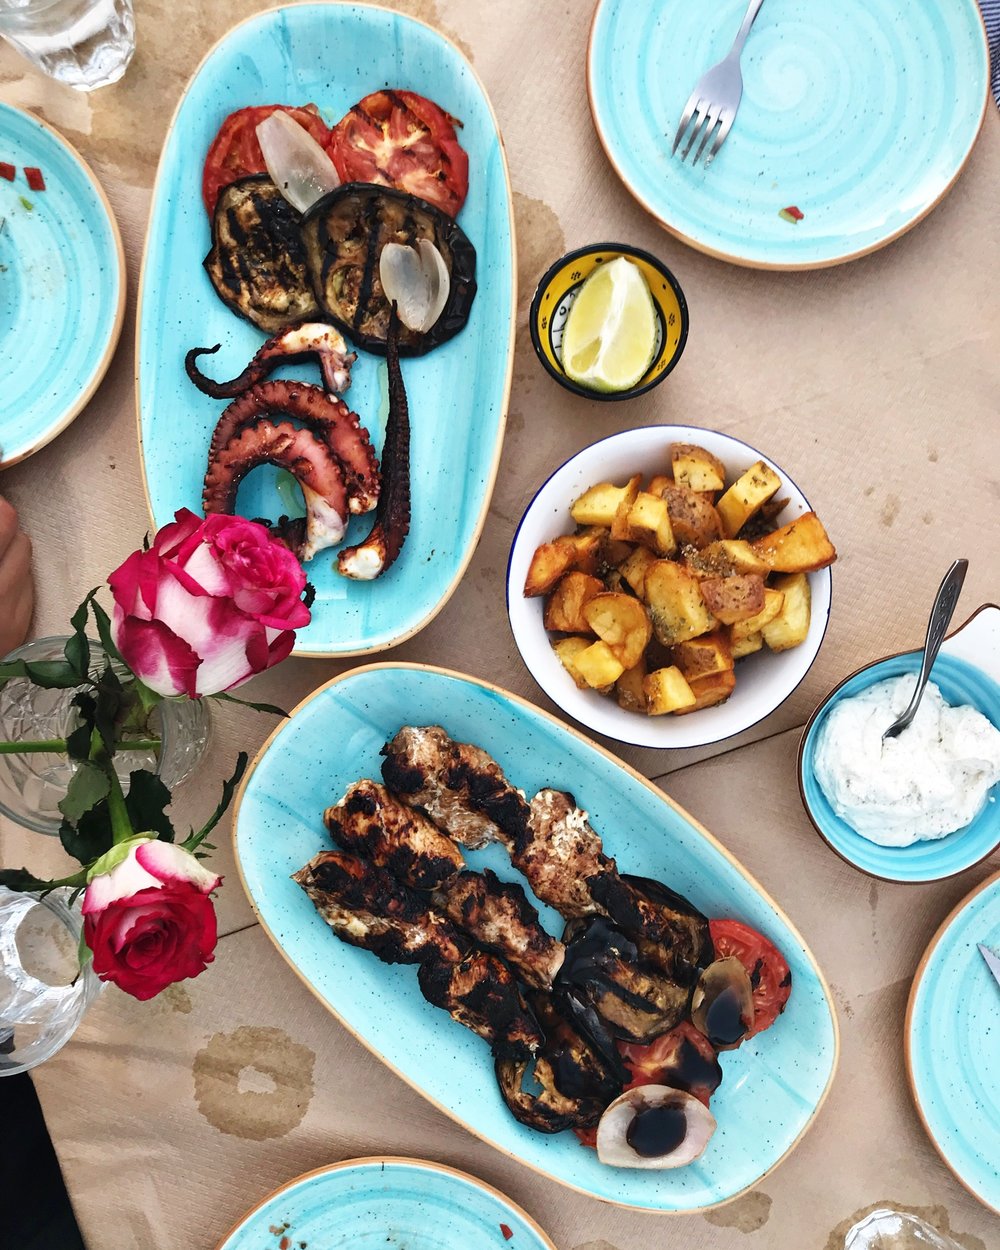 Grilled octopus and souvlaki on repeat